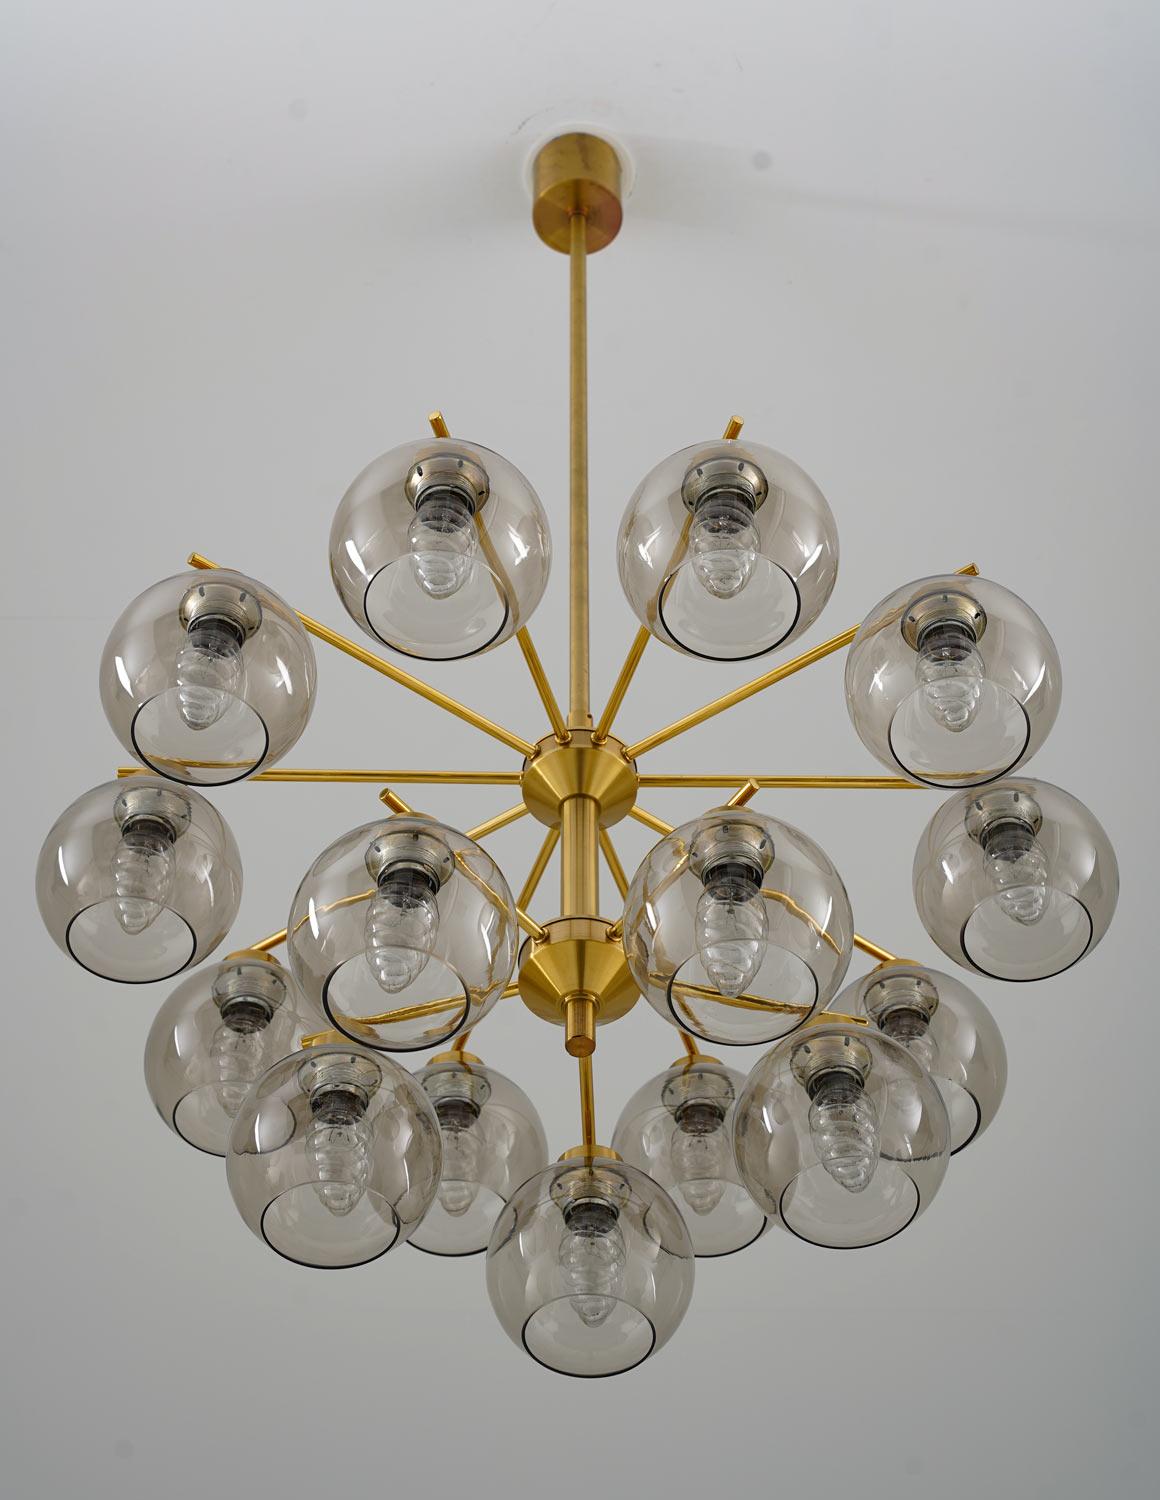 Scandinavian Modern Swedish Chandeliers in Brass and Glass by Holger Johansson For Sale